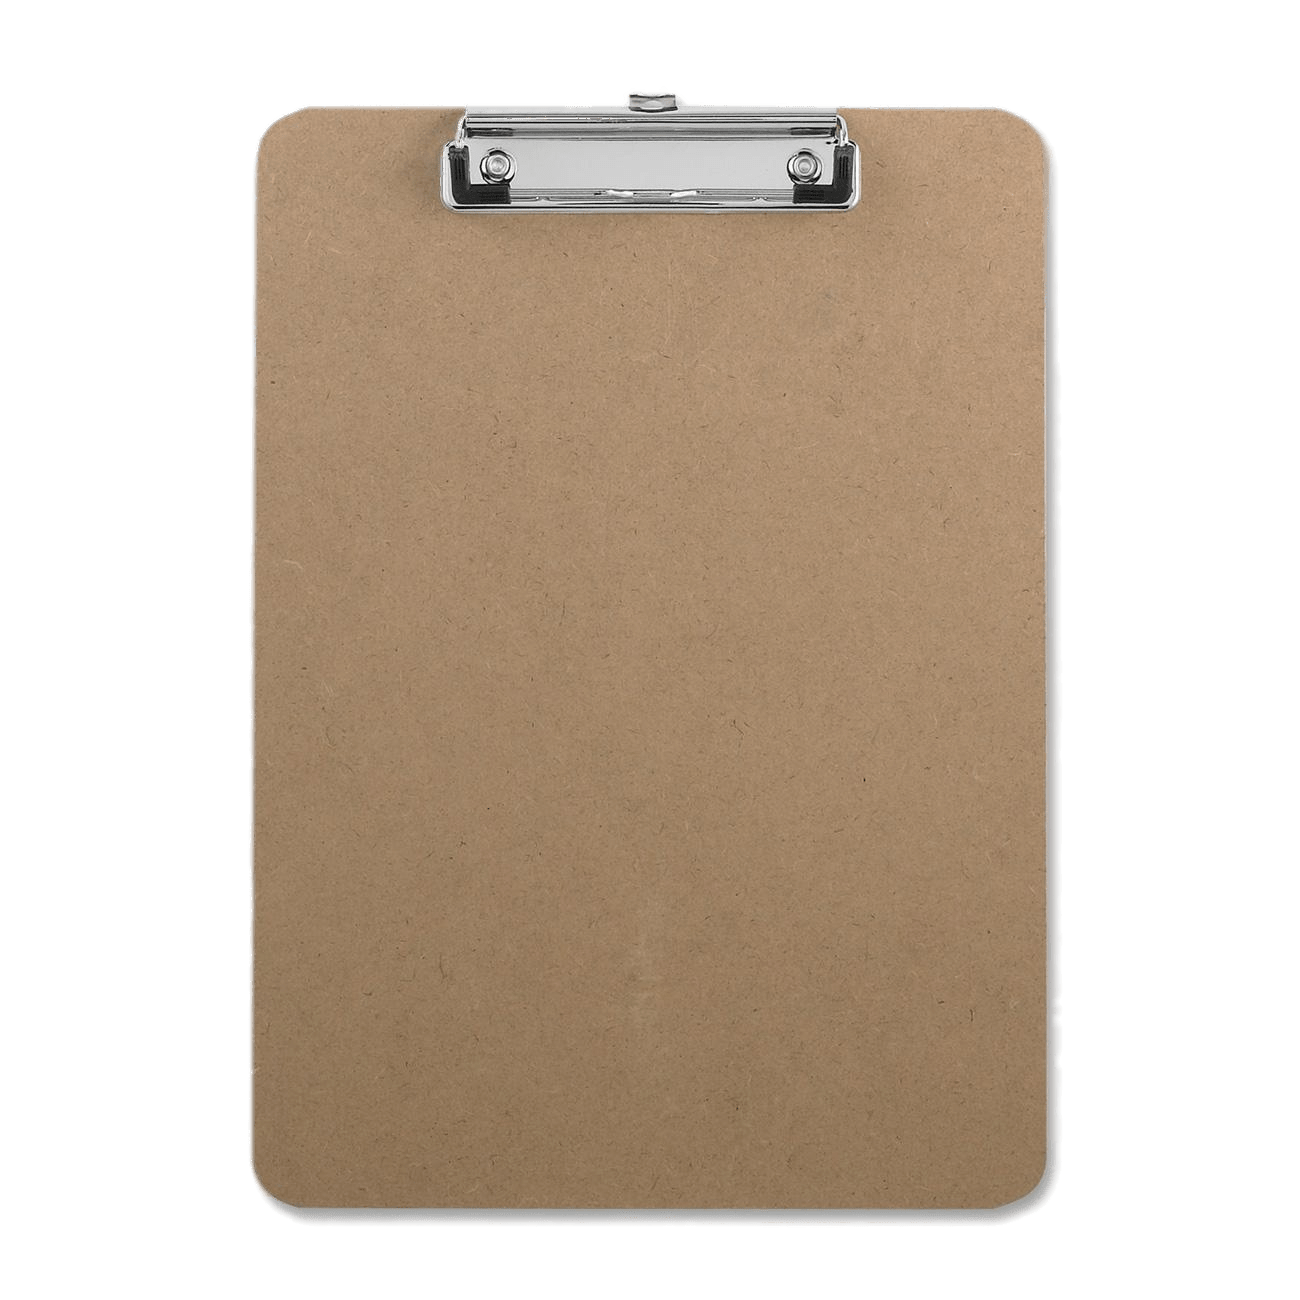 Clipboard HD Image Free PNG Image